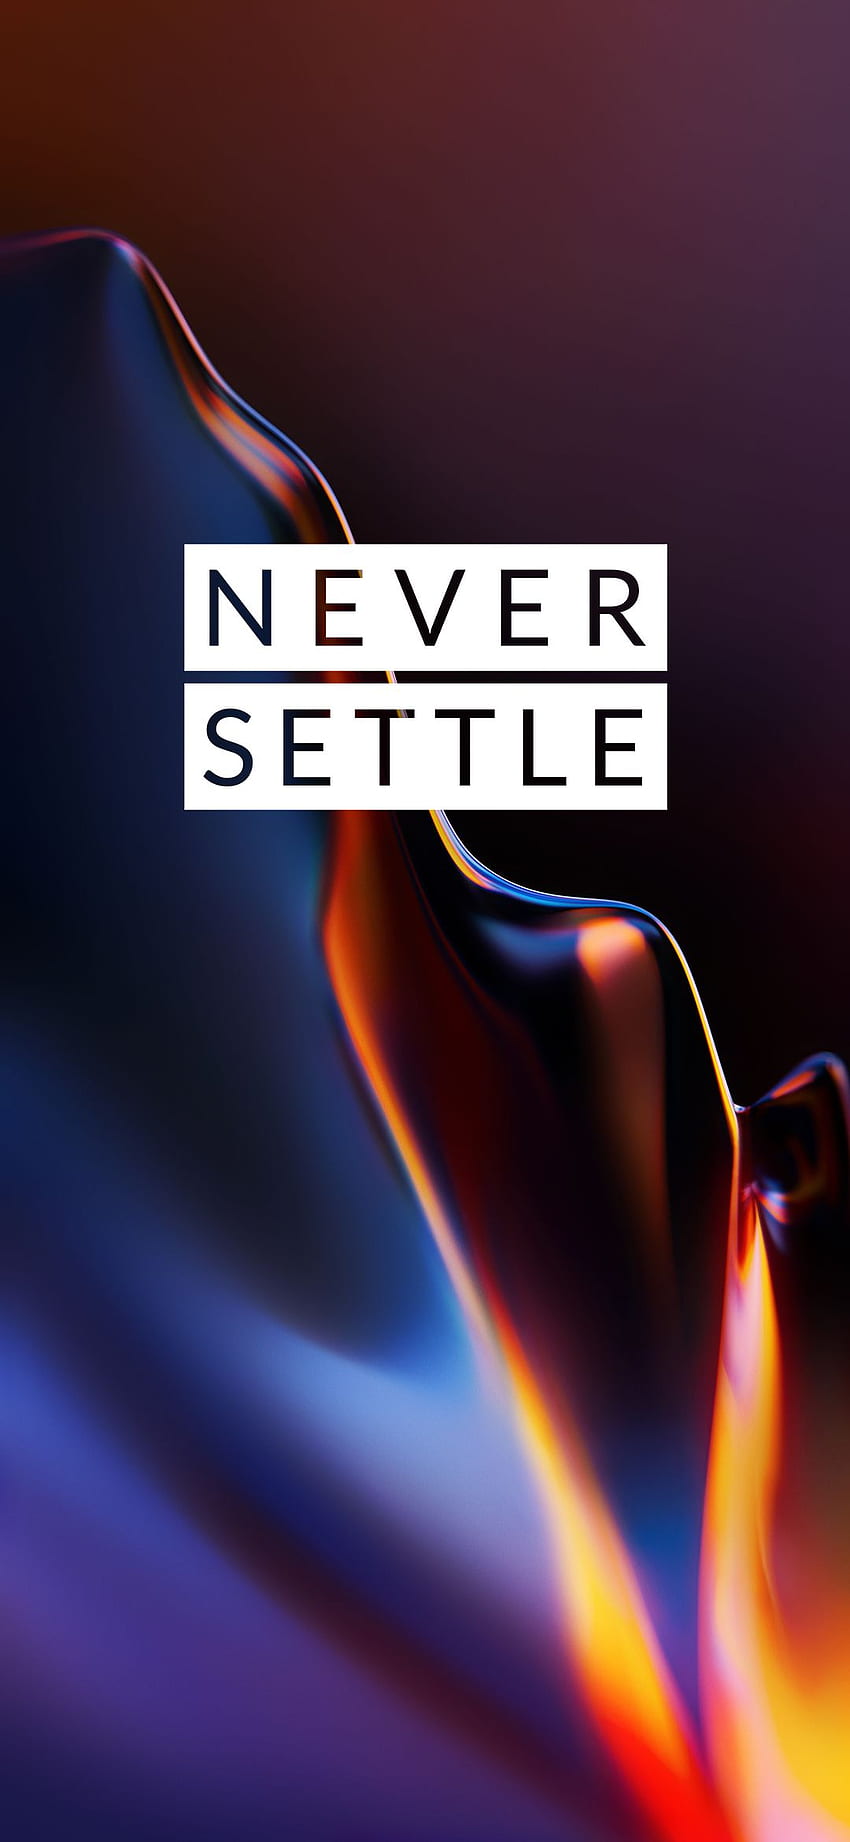 750+ Oneplus Wallpaper Pictures | Download Free Images on Unsplash